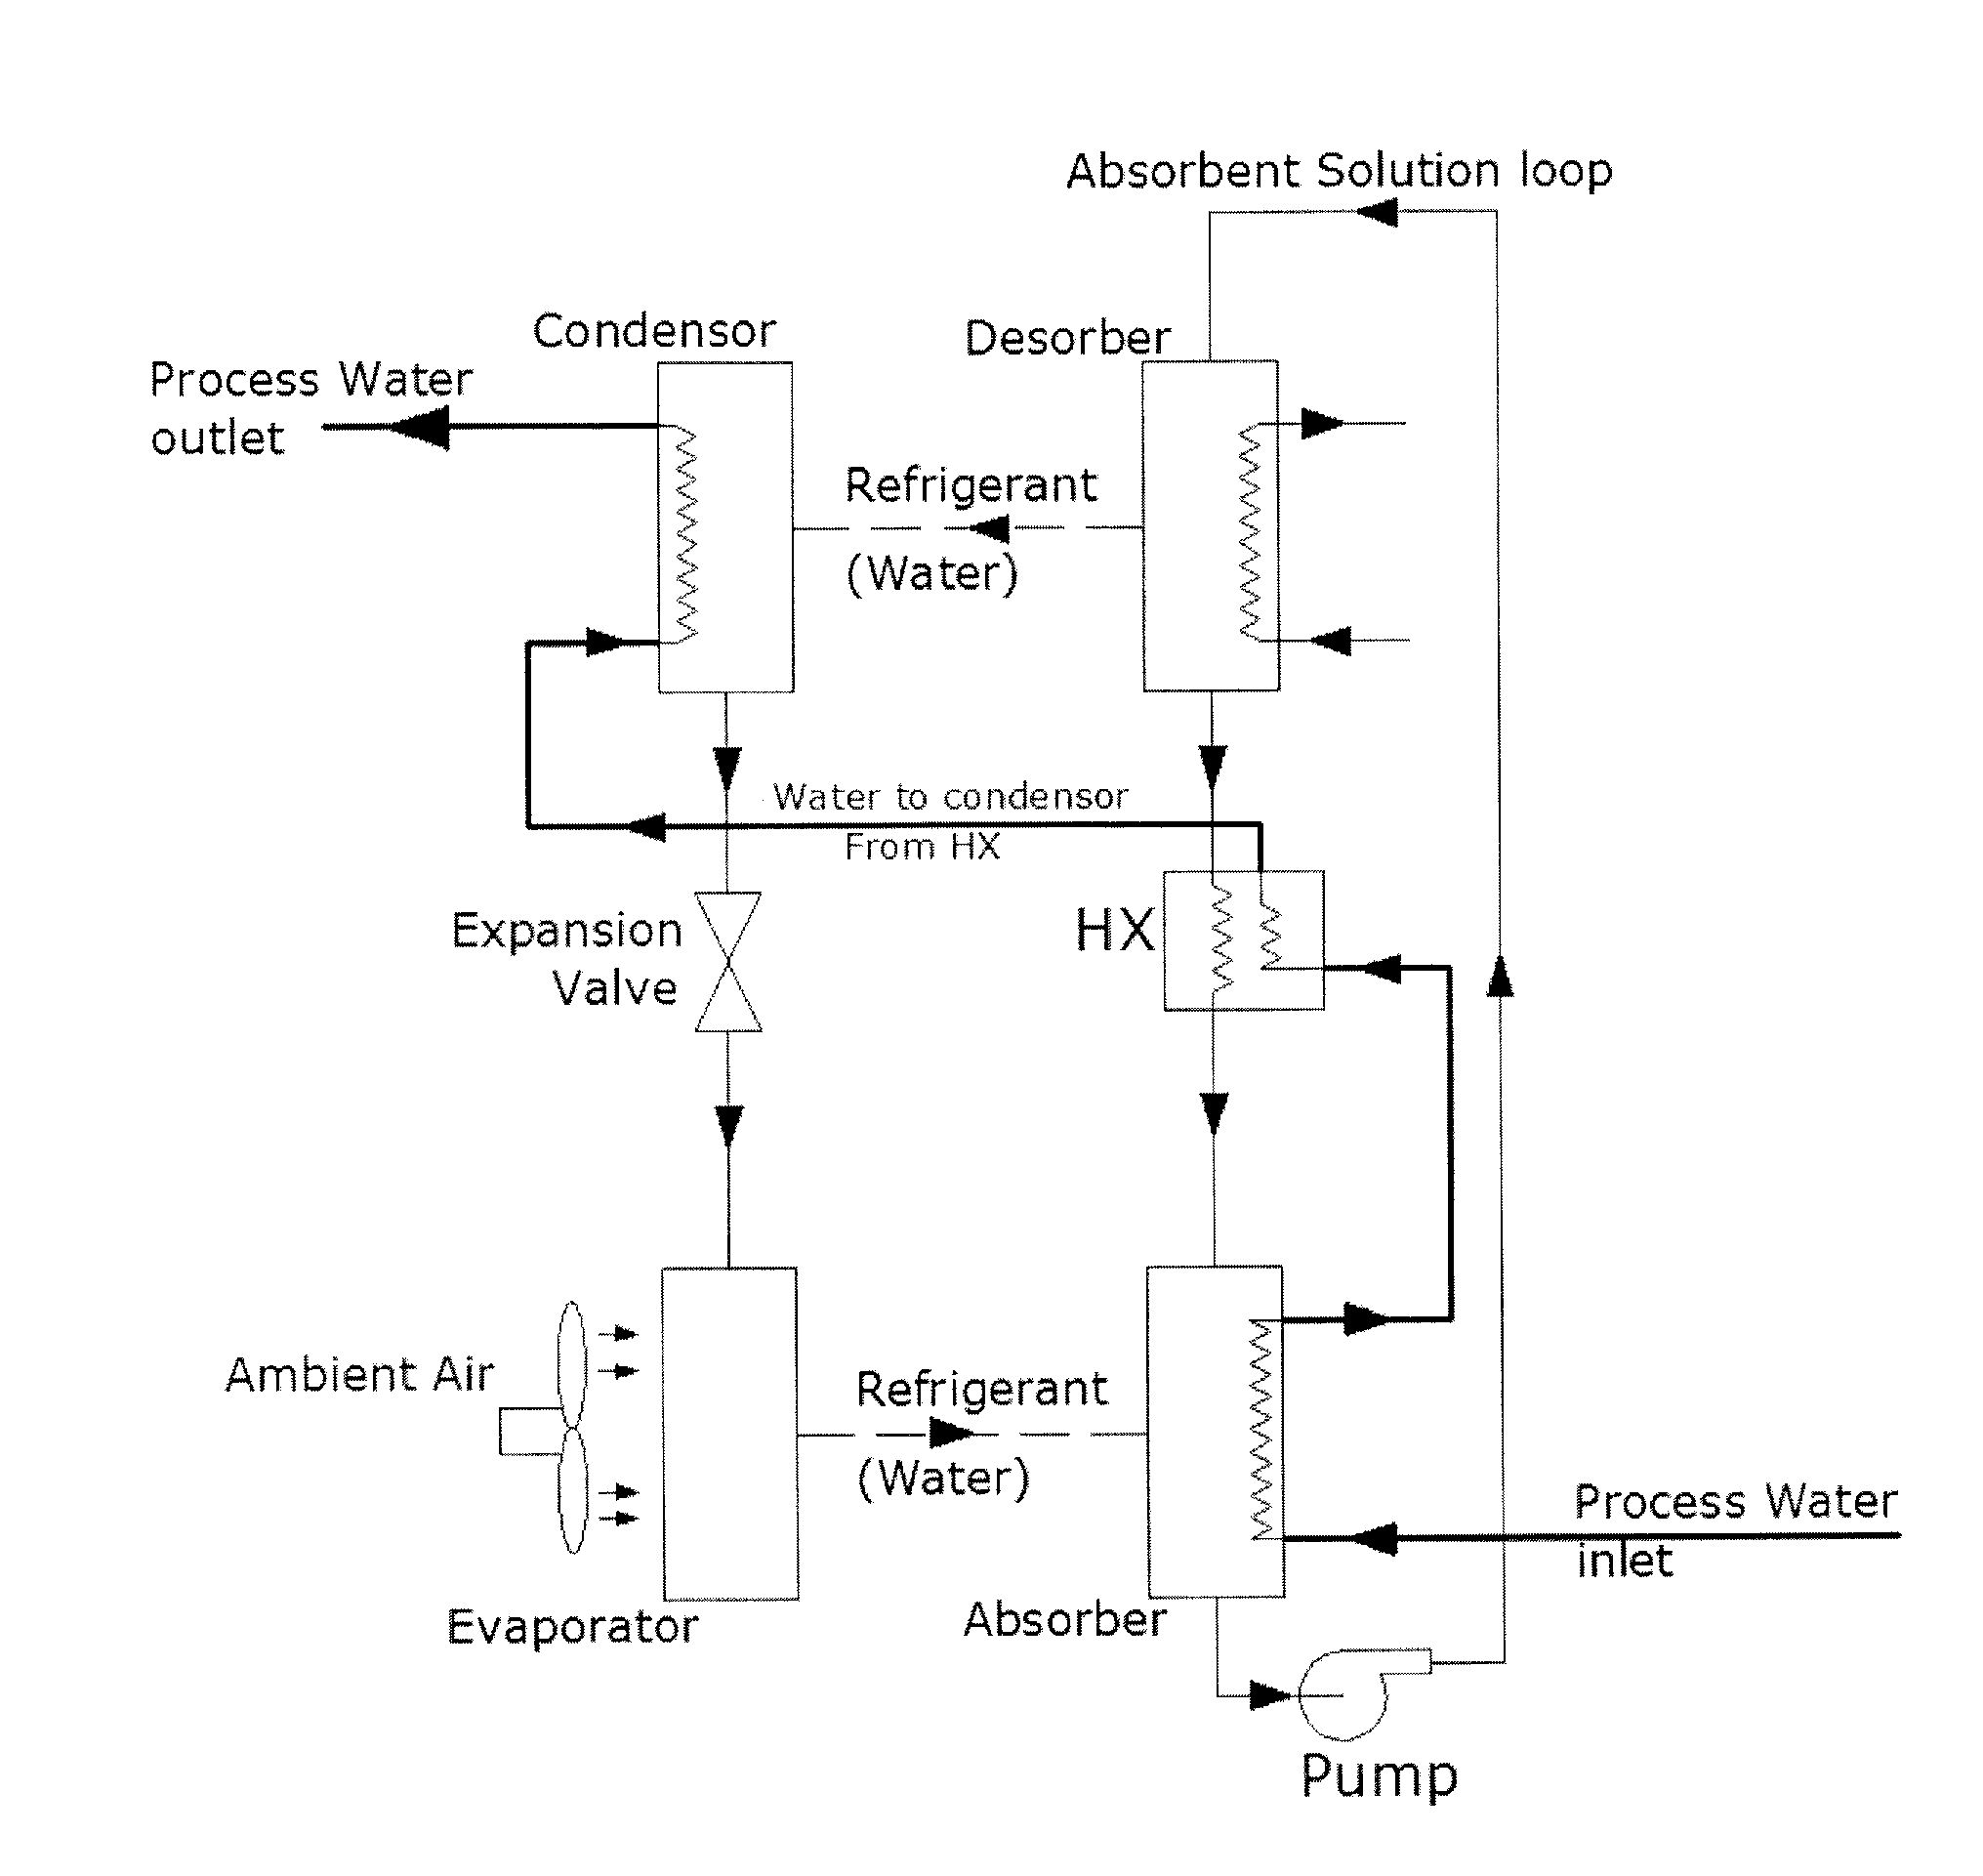 Open Absorption Cycle for Combined Dehumidification, Water Heating, and Evaporative Cooling